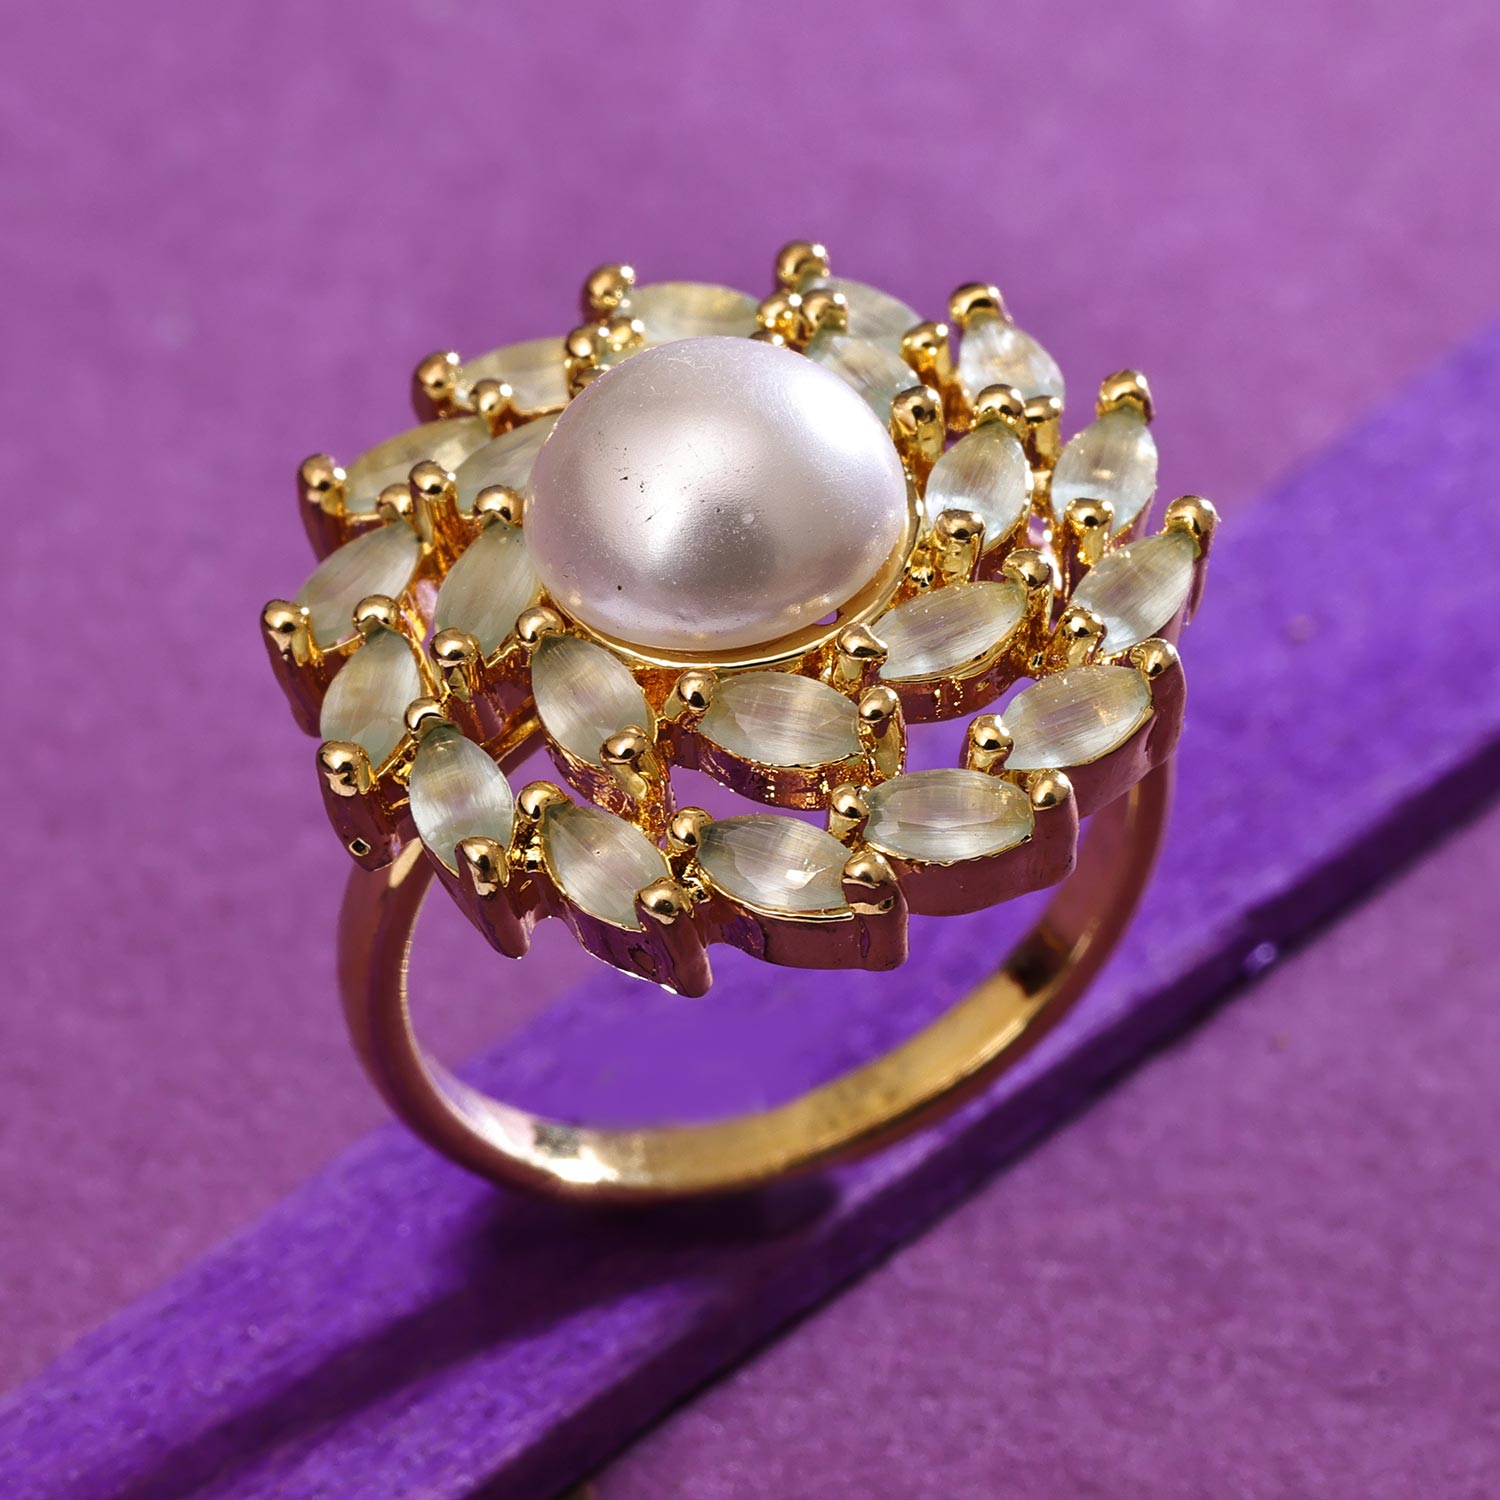 235-GR4436 - 22K Gold Ring For Women with Pearl | Gold rings, Gold ring  designs, 22k gold ring